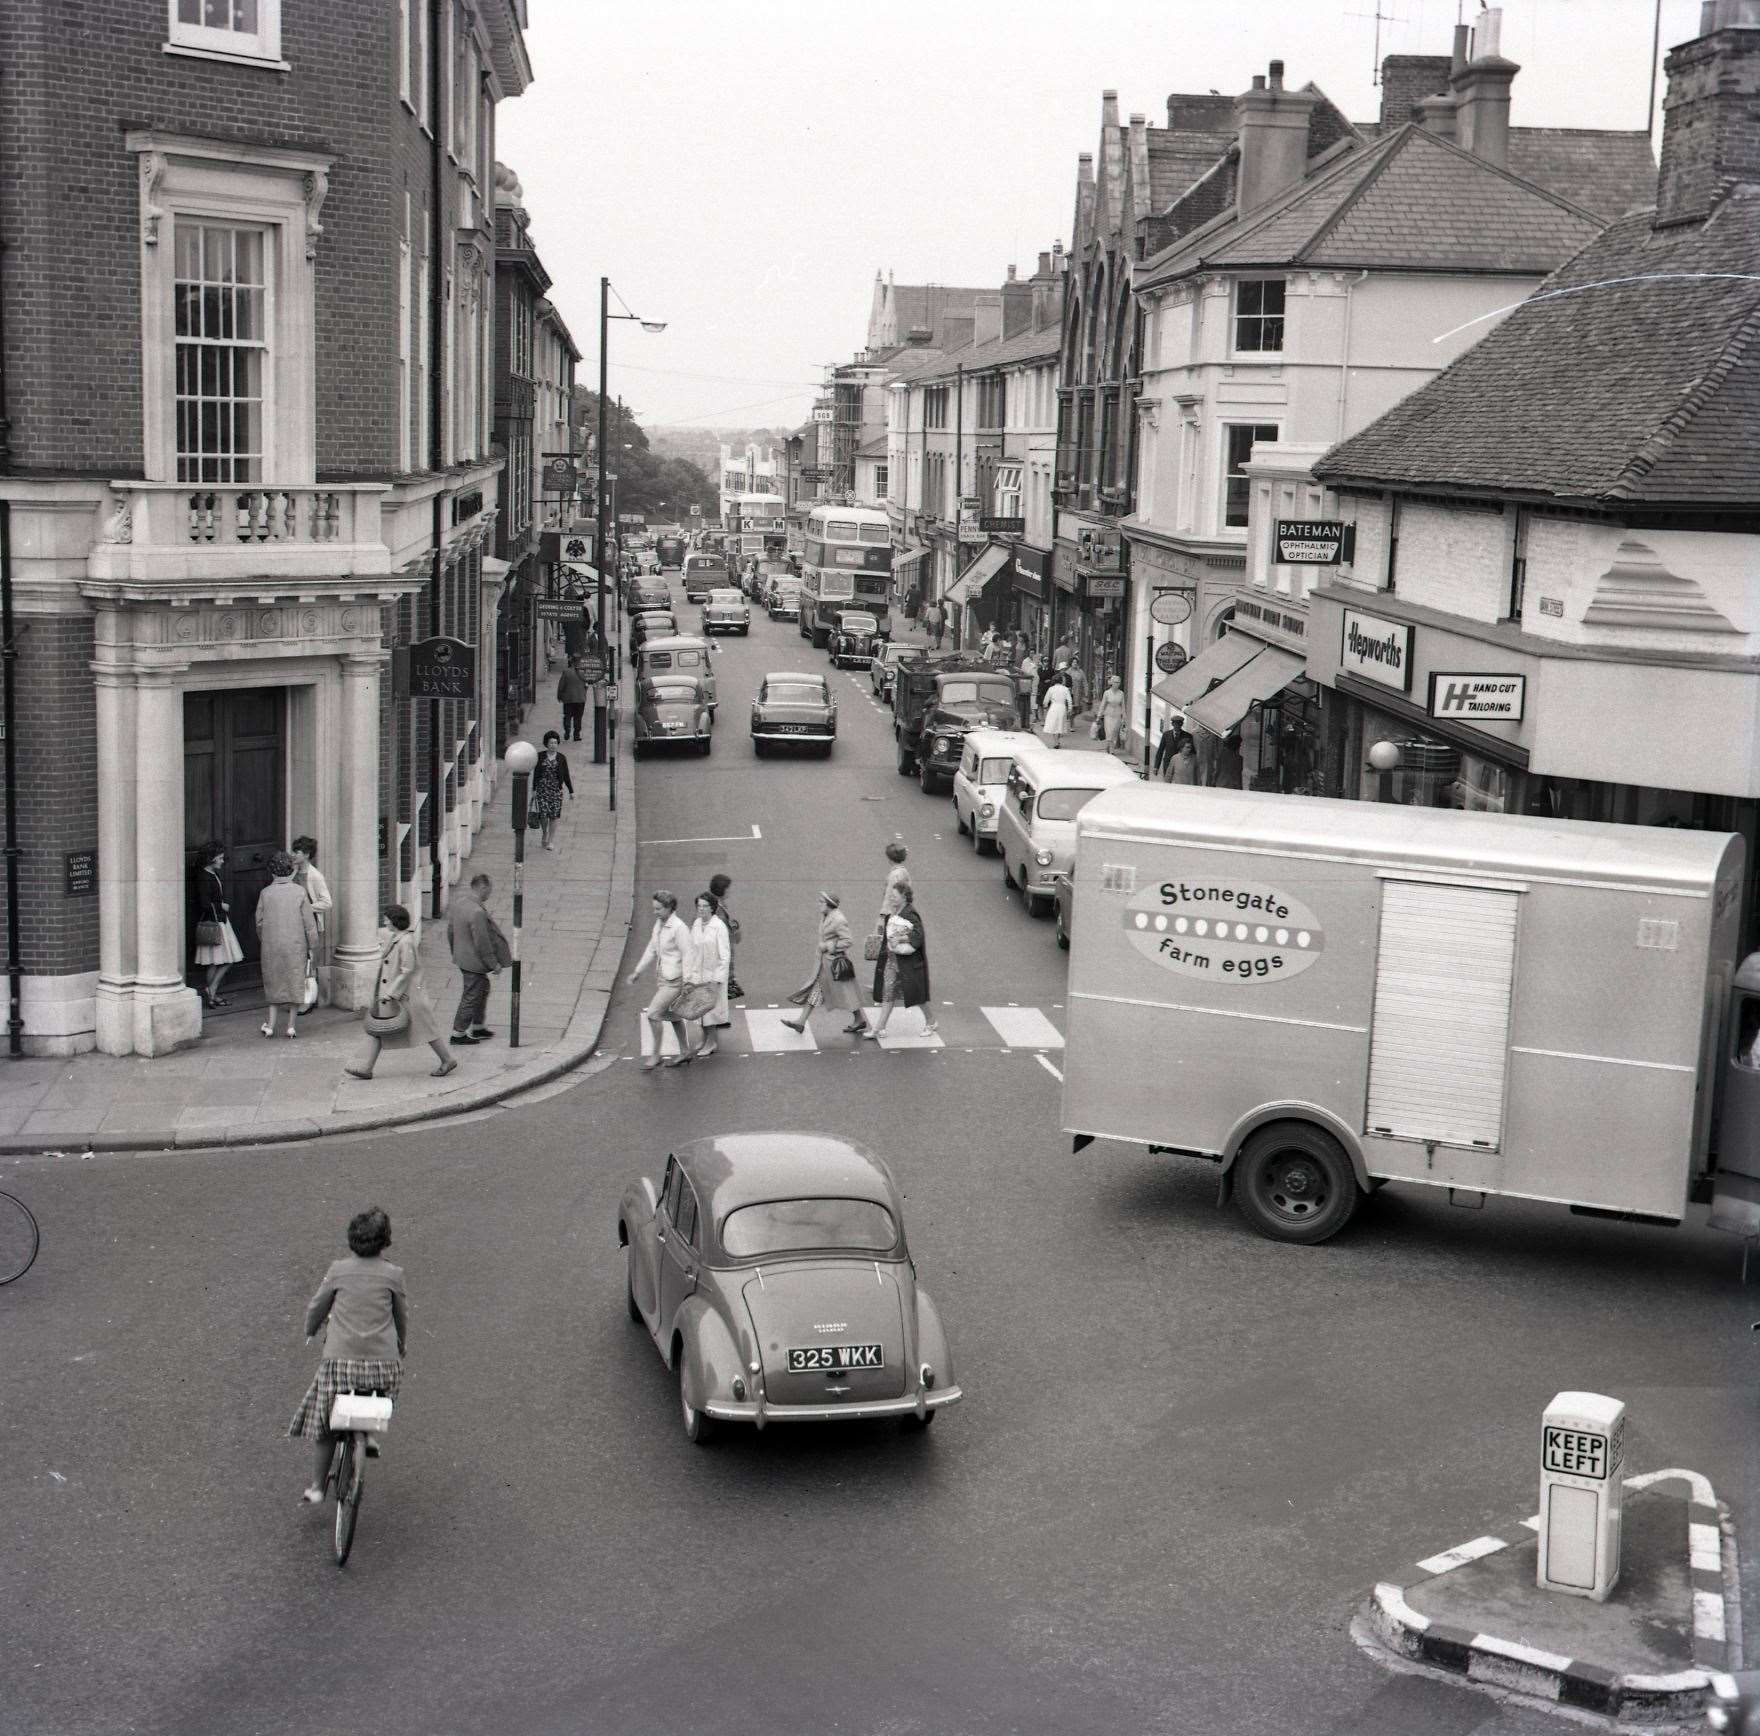 The Upper High Street junction with Bank Street in Ashford pictured in 1964 when traffic was still two-way and the street hadn’t been pedestrianised